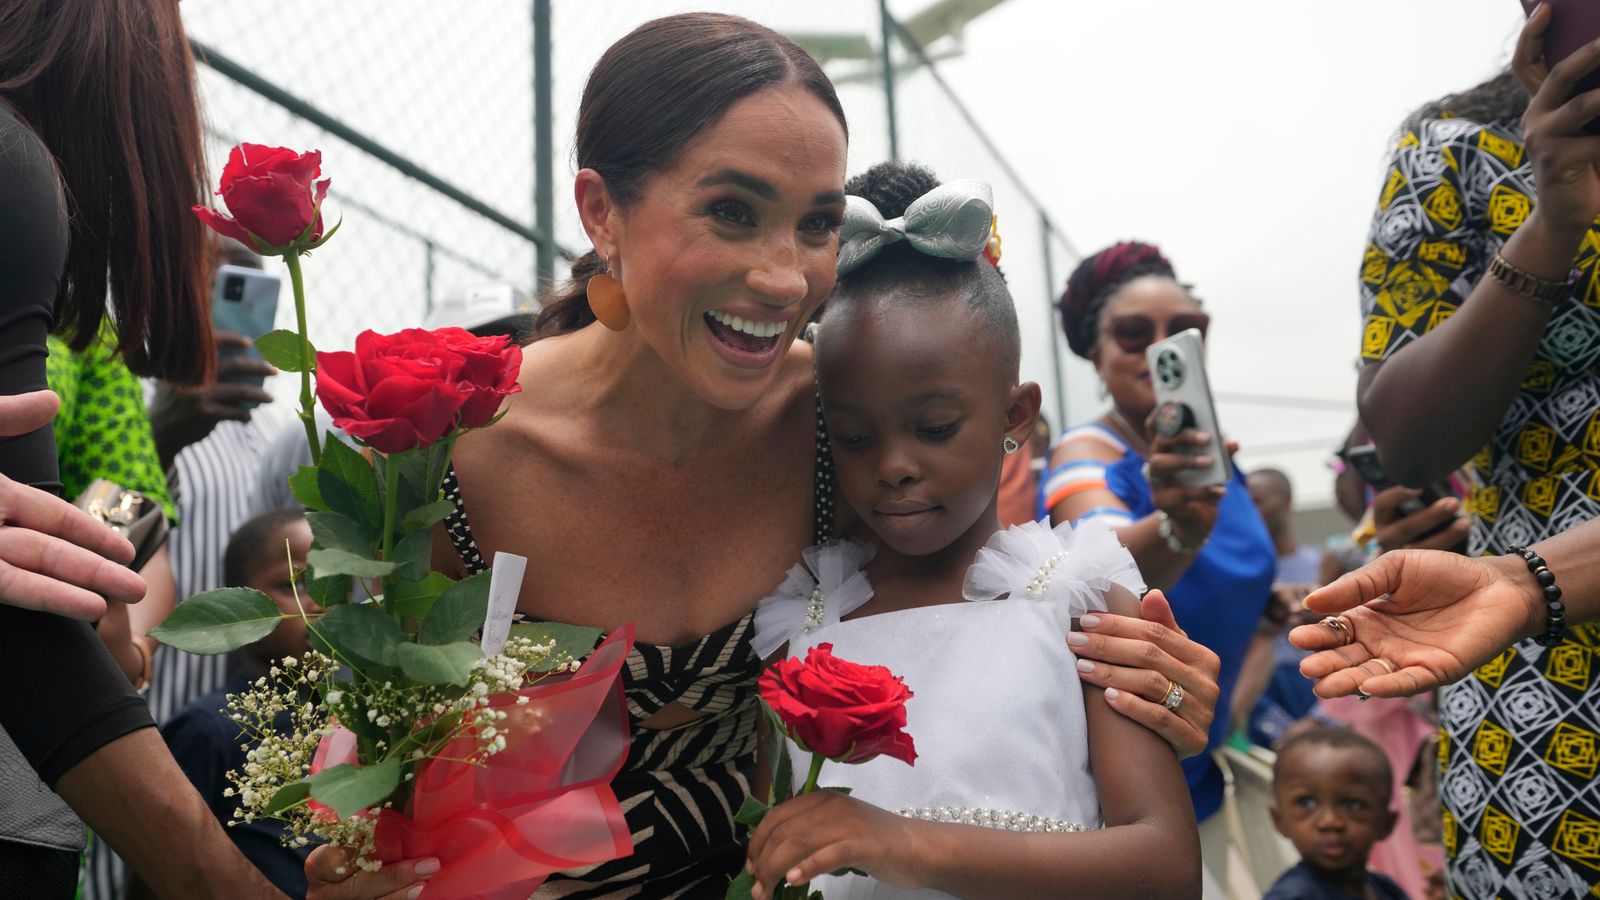 Meghan, Duchess of Sussex, says Nigeria is 'my country' on visit with Prince Harry